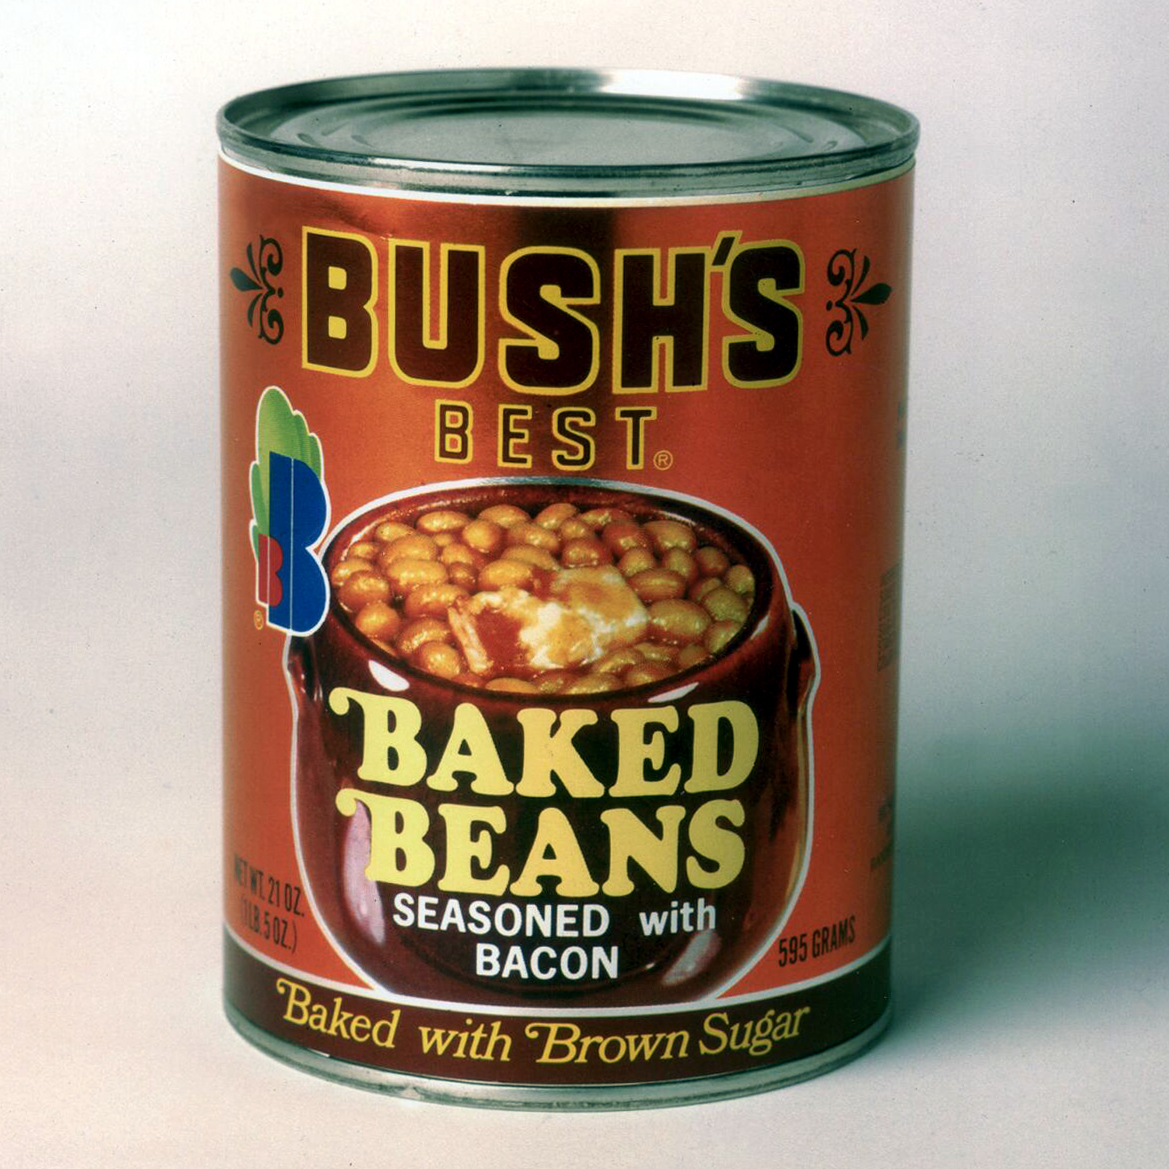 Original Baked Bean can from 1969